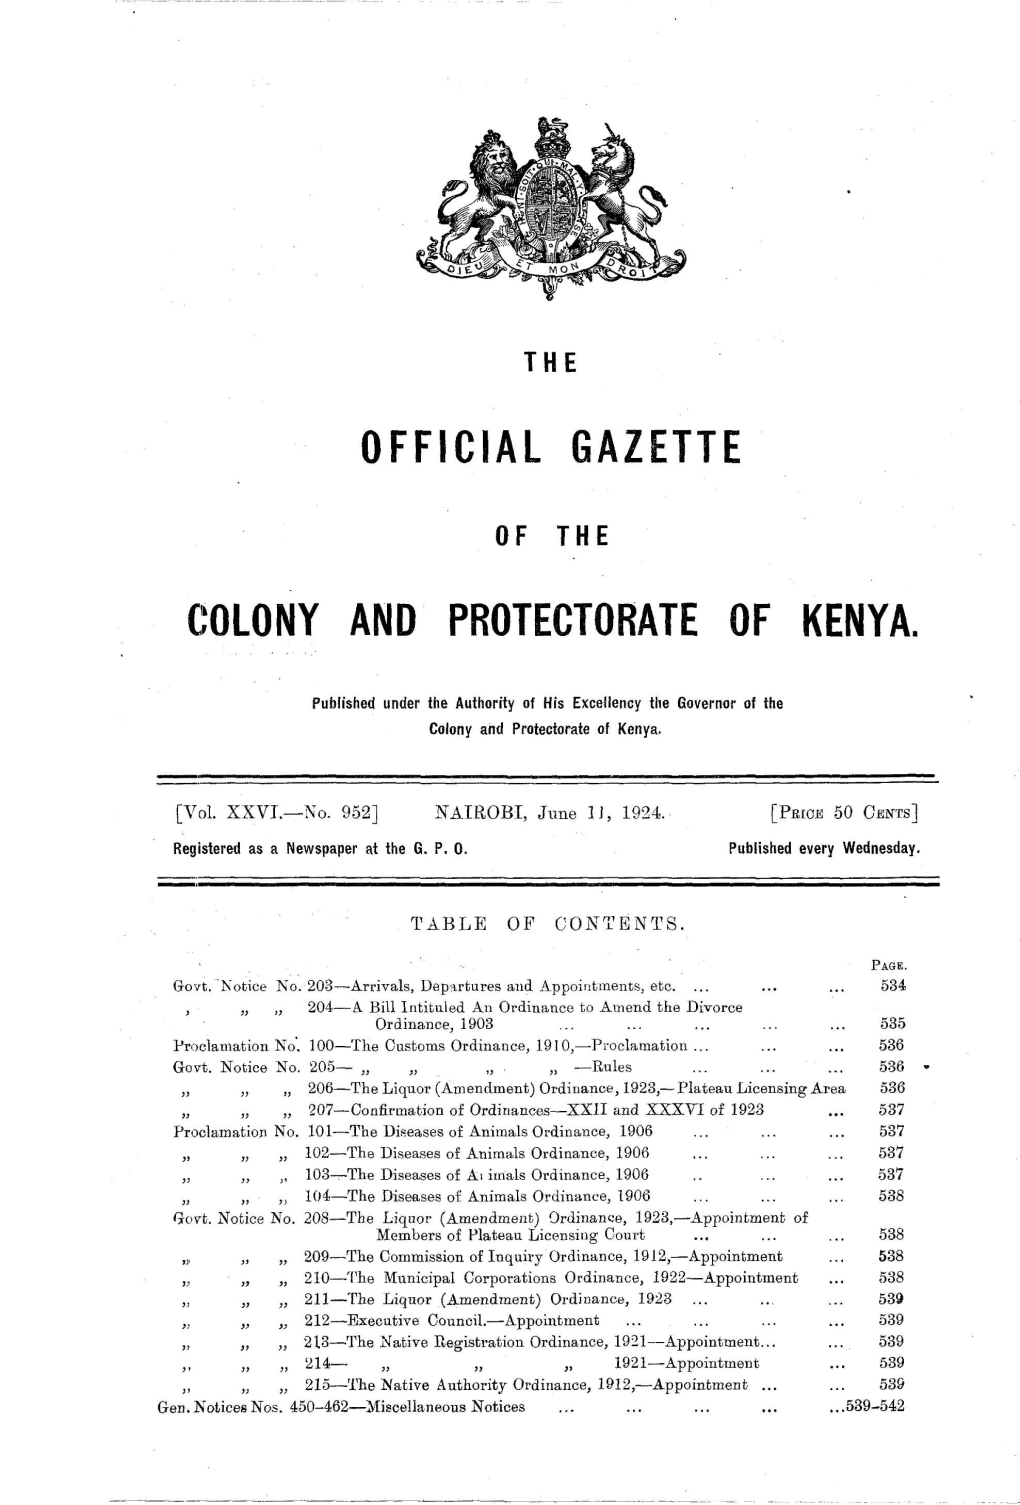 'Olony and Protectorate of Kenya